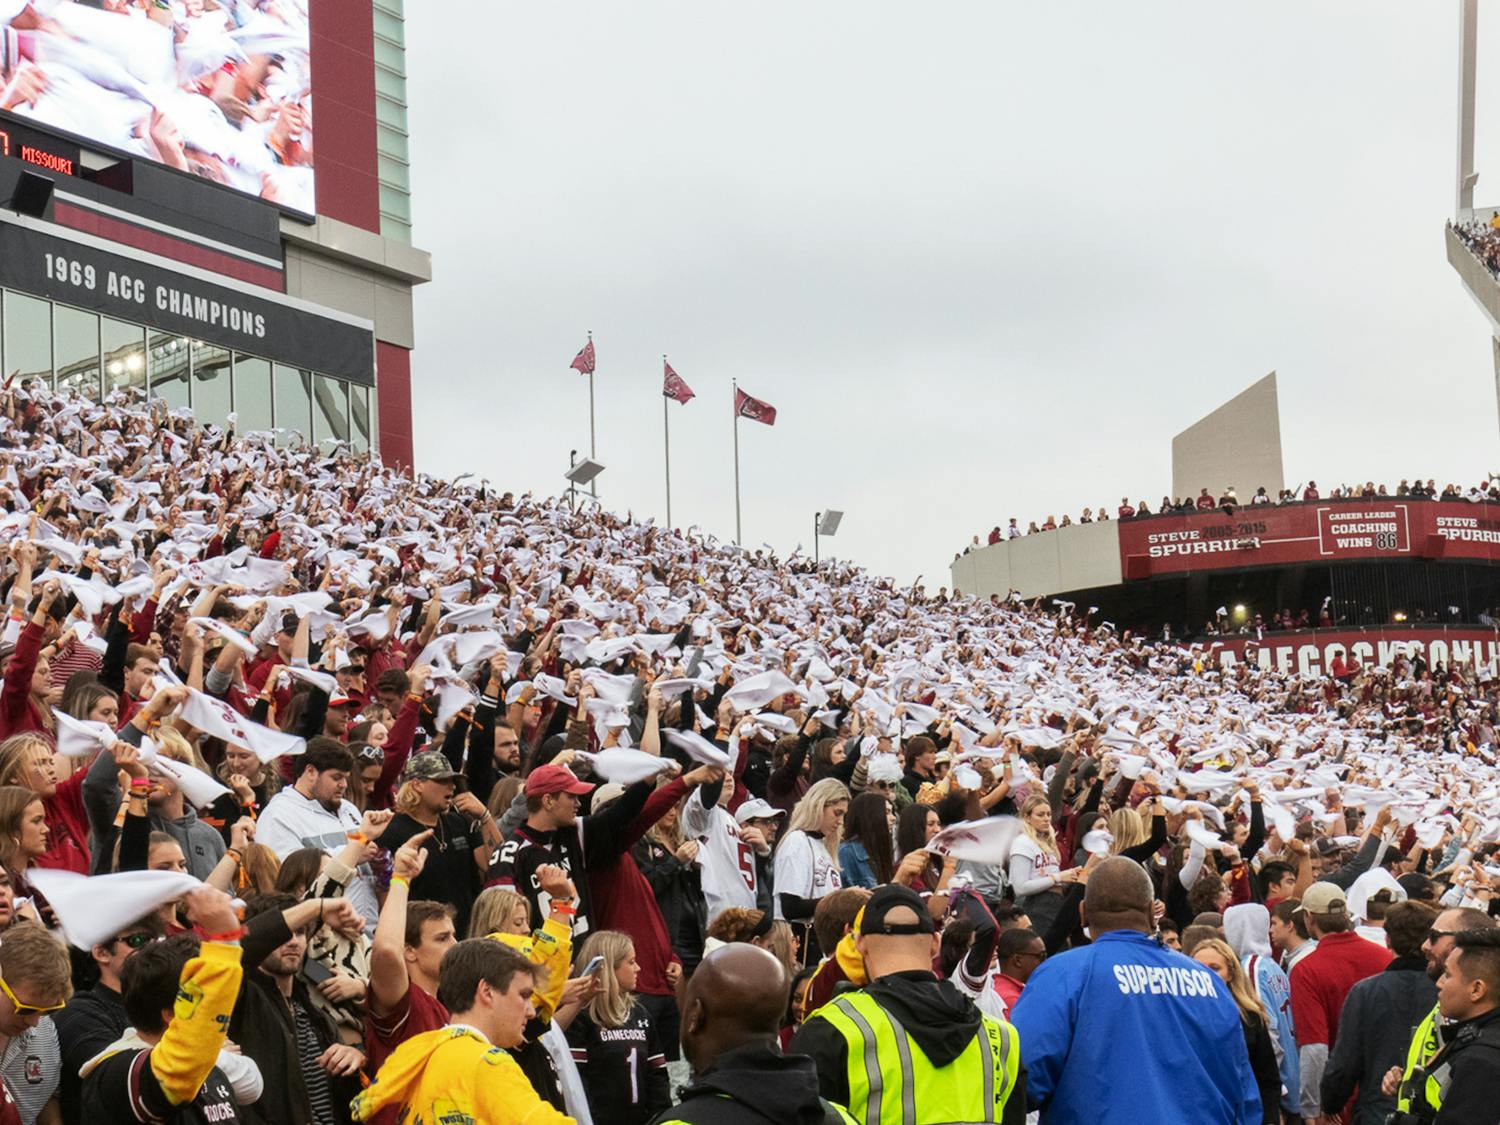 FILE — The University of South Carolina's student section spins rally towels as "Sandstorm" plays over the loudspeakers on Oct. 29, 2022. The Gamecocks lost to the University of Missouri Tigers 23-10.